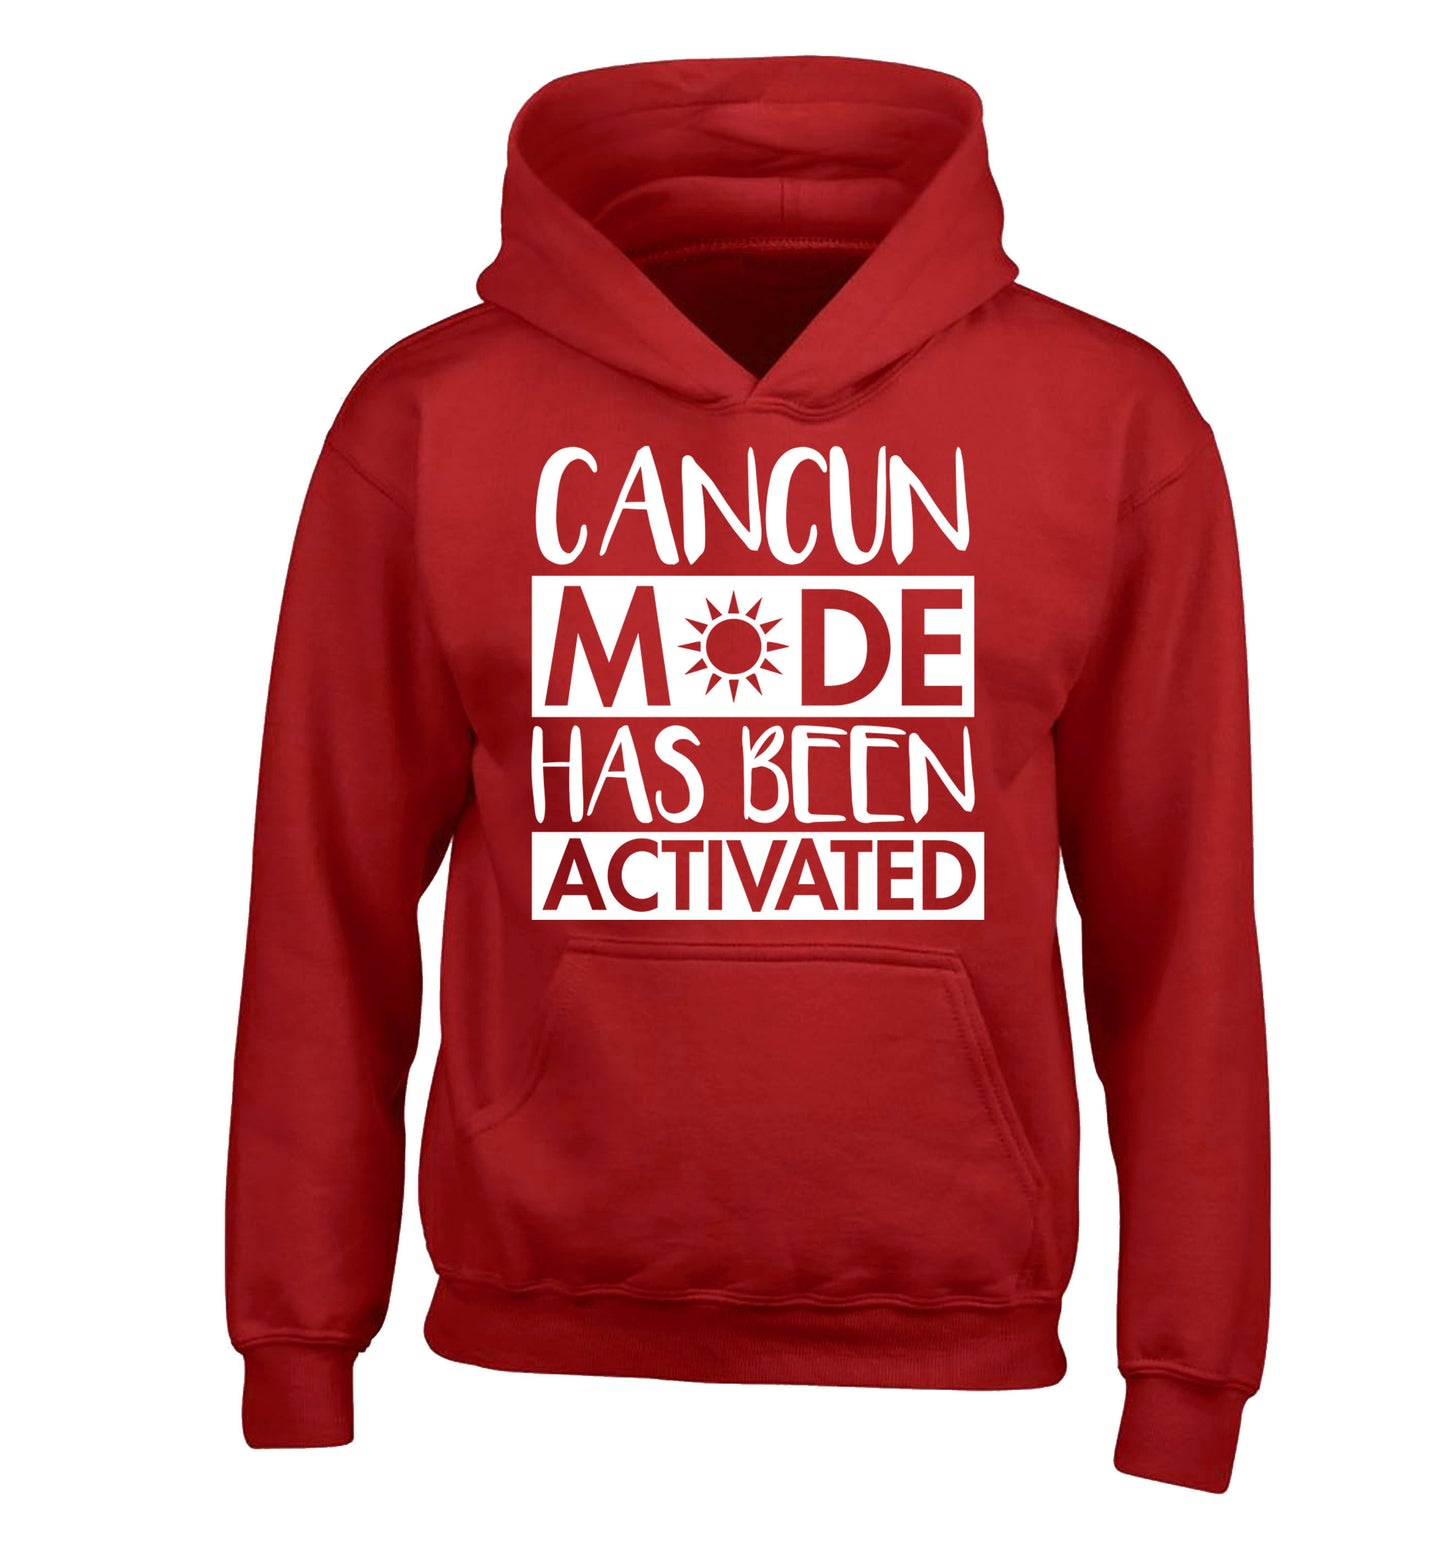 Cancun mode has been activated children's red hoodie 12-14 Years